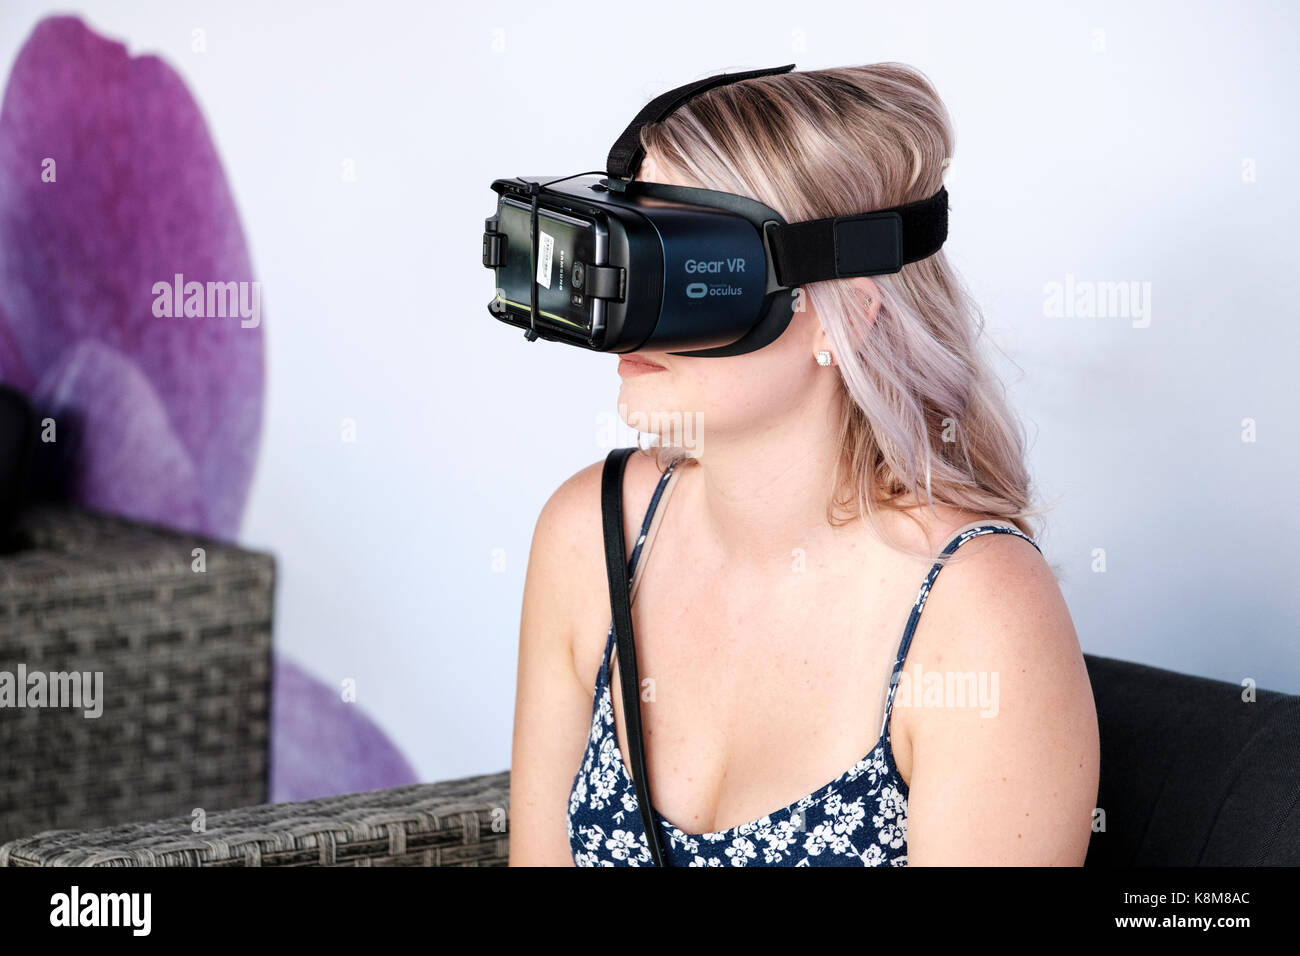 Teenager girl wearing Oculus Gear VR headset, virtual reality (VR) equipment with Samsung phone. Stock Photo